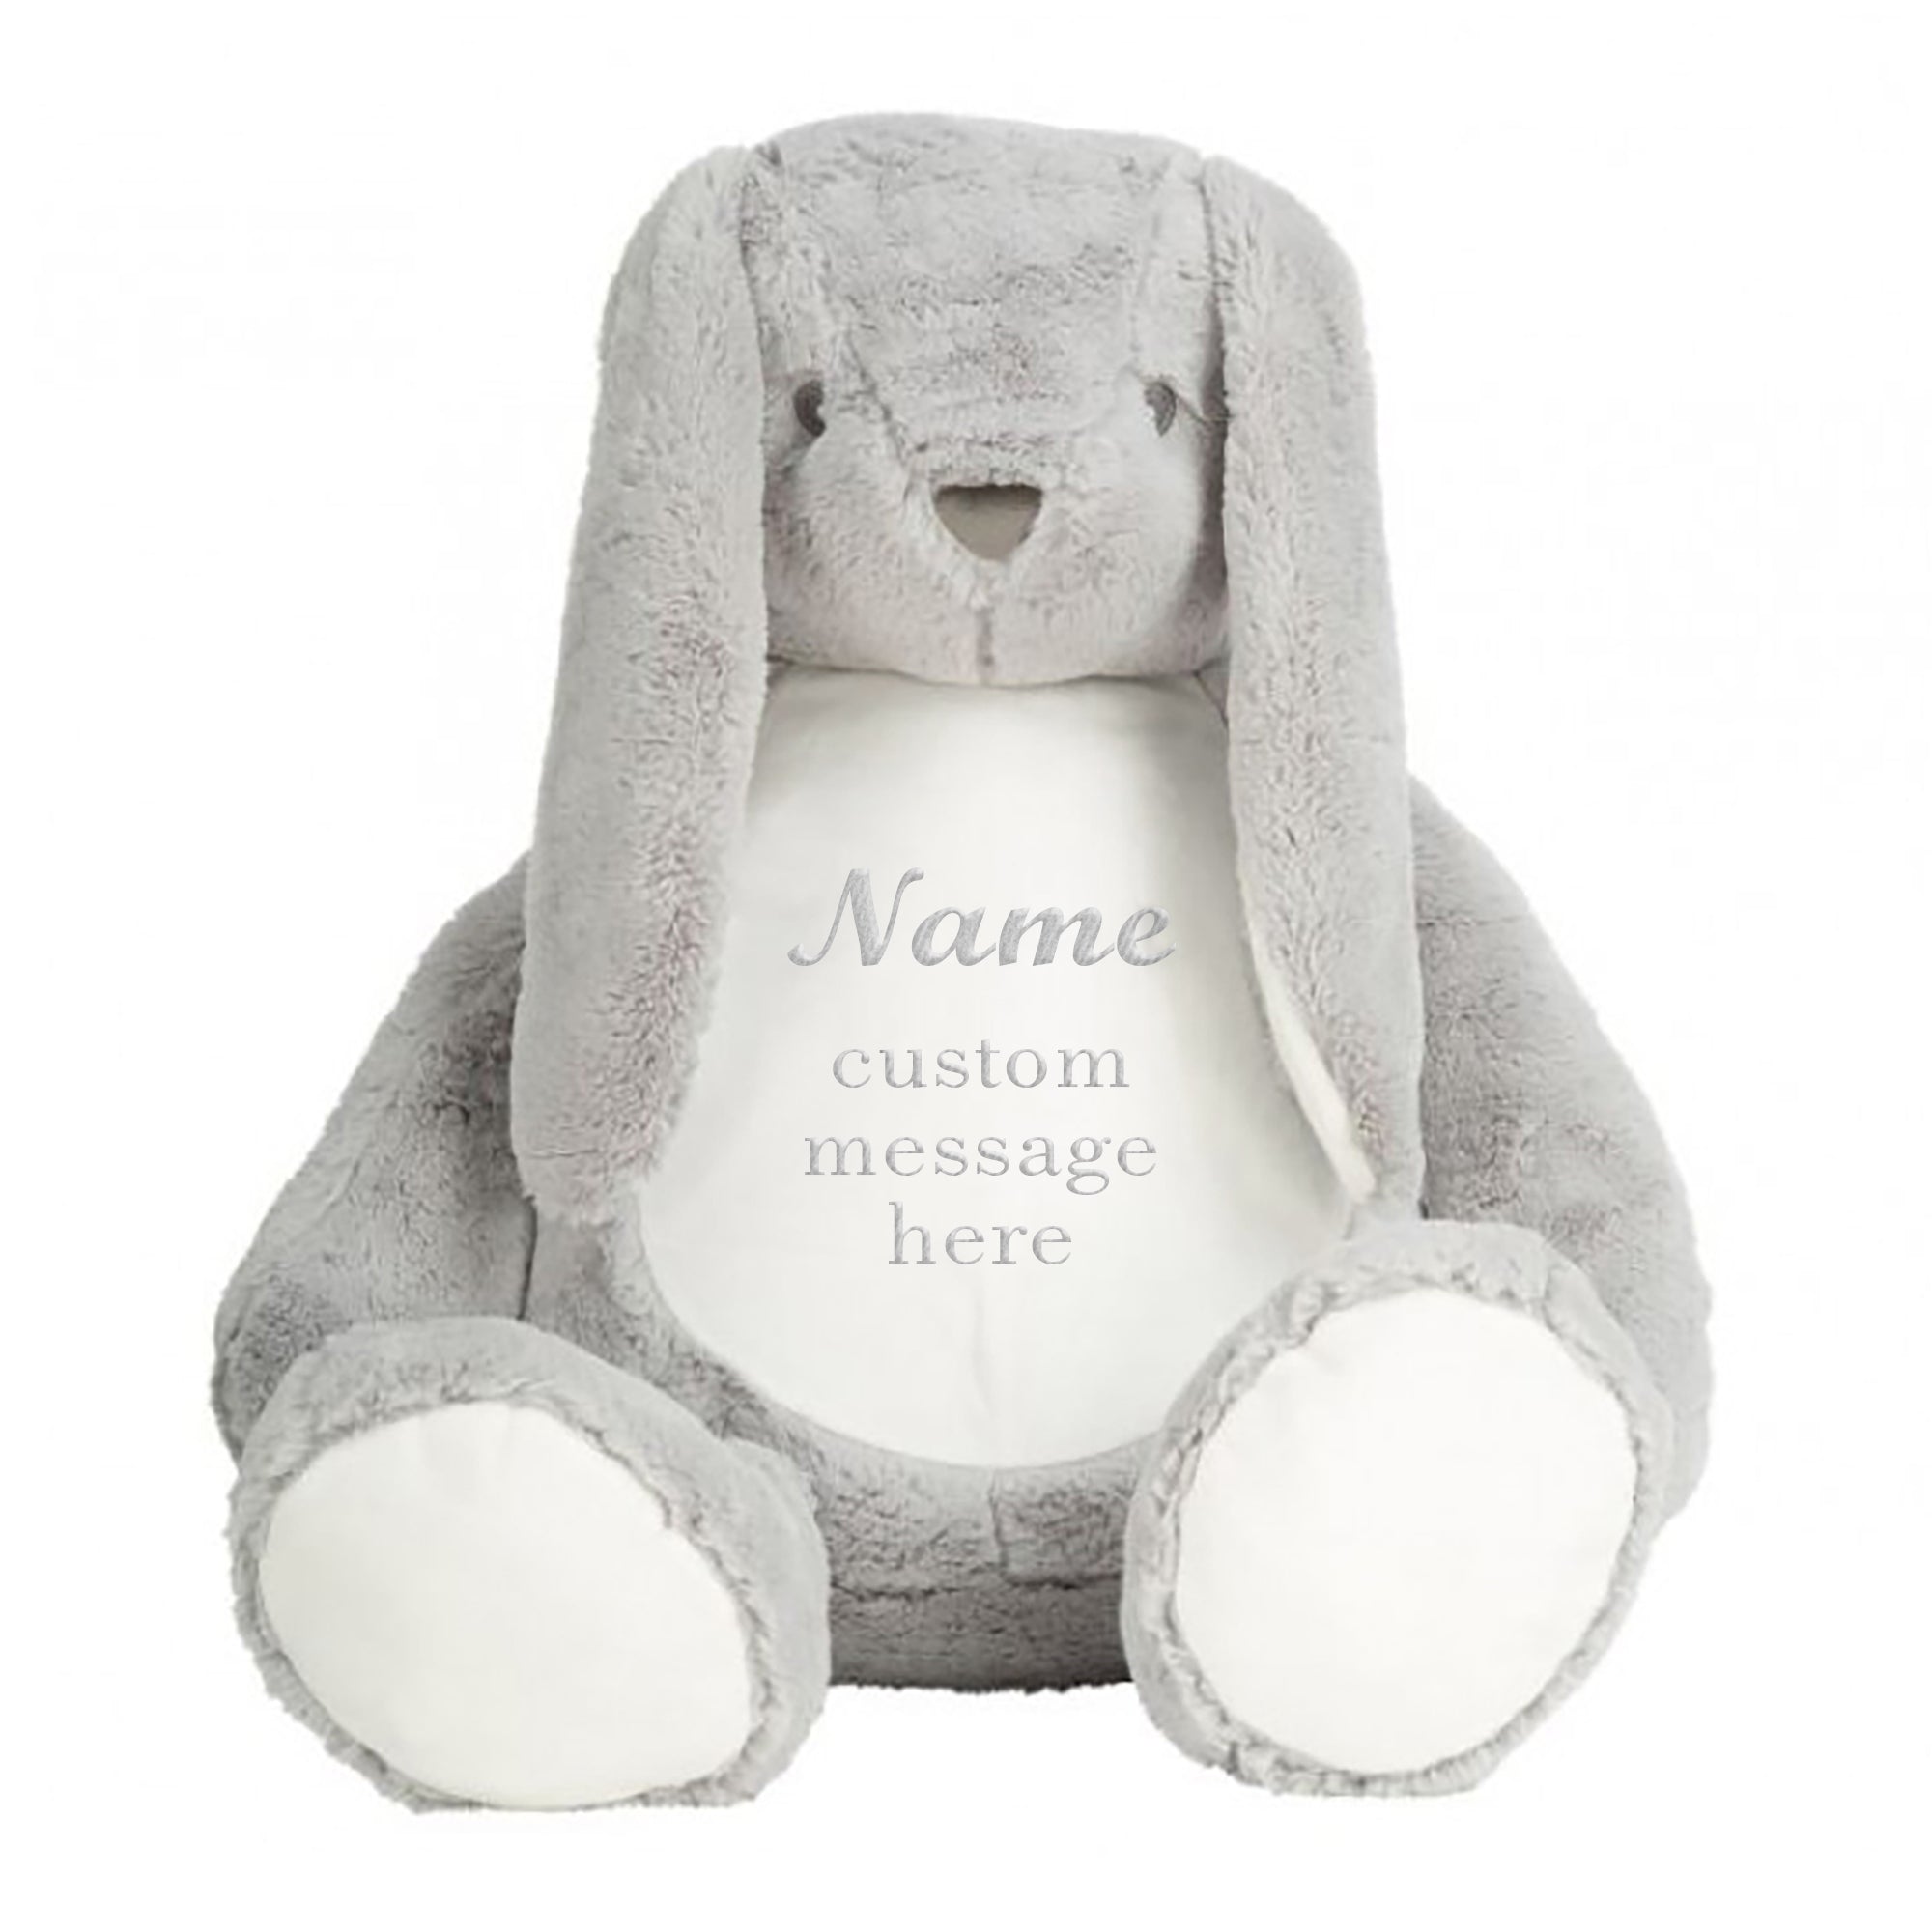 Personalised Valentines Teddy - Giant Bunny